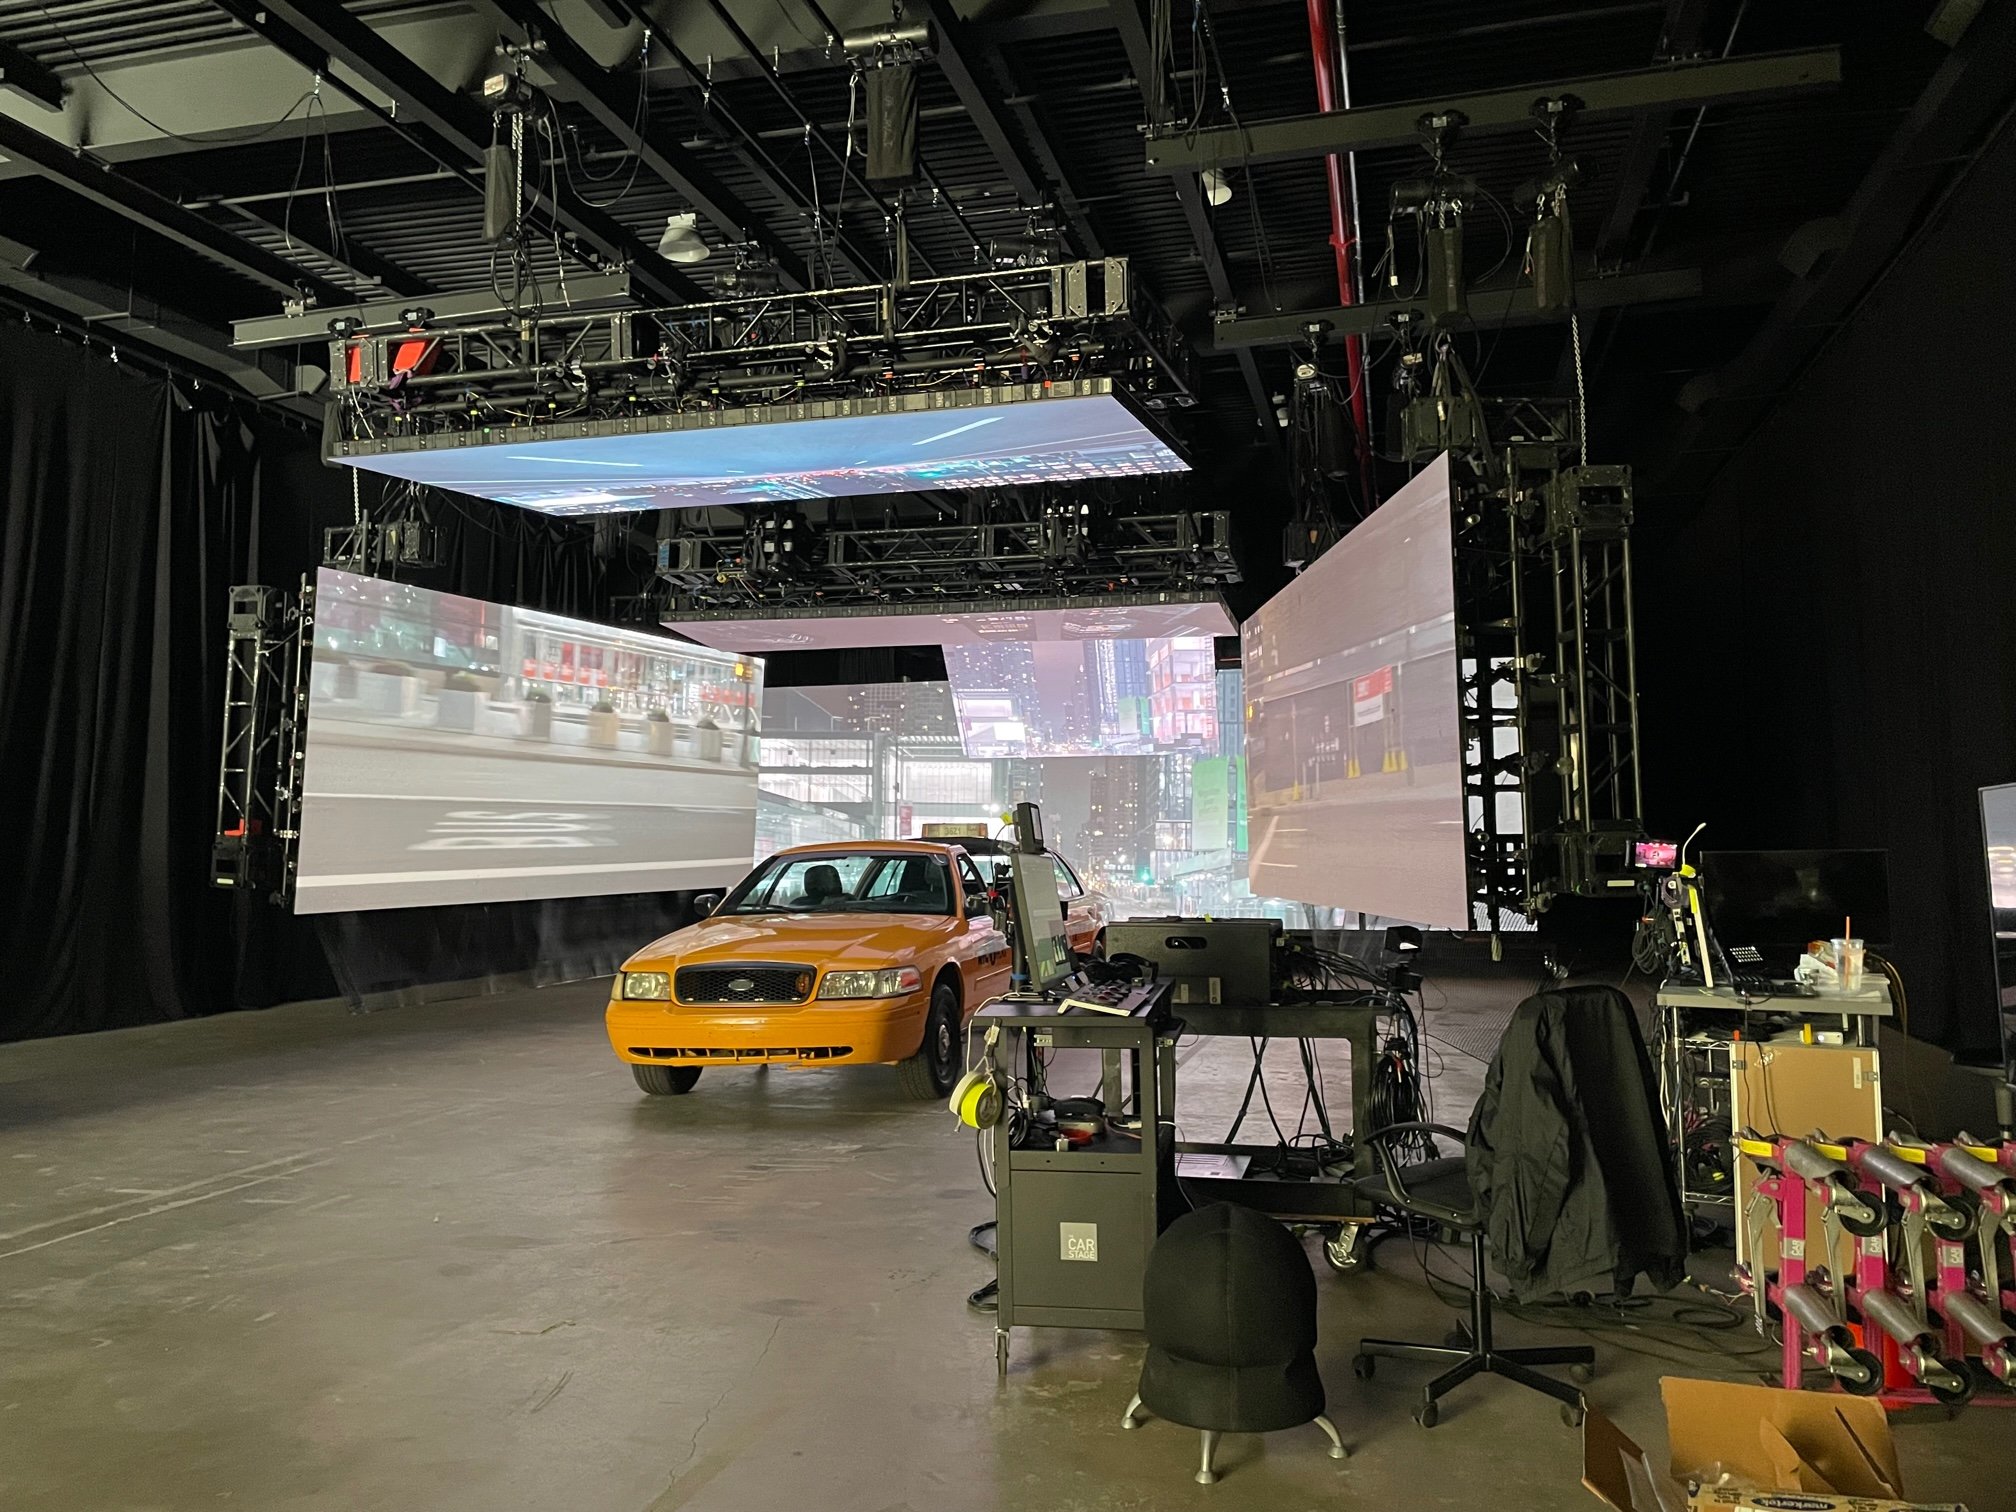 Split Taxi on set as Carstage Positions screen imagery